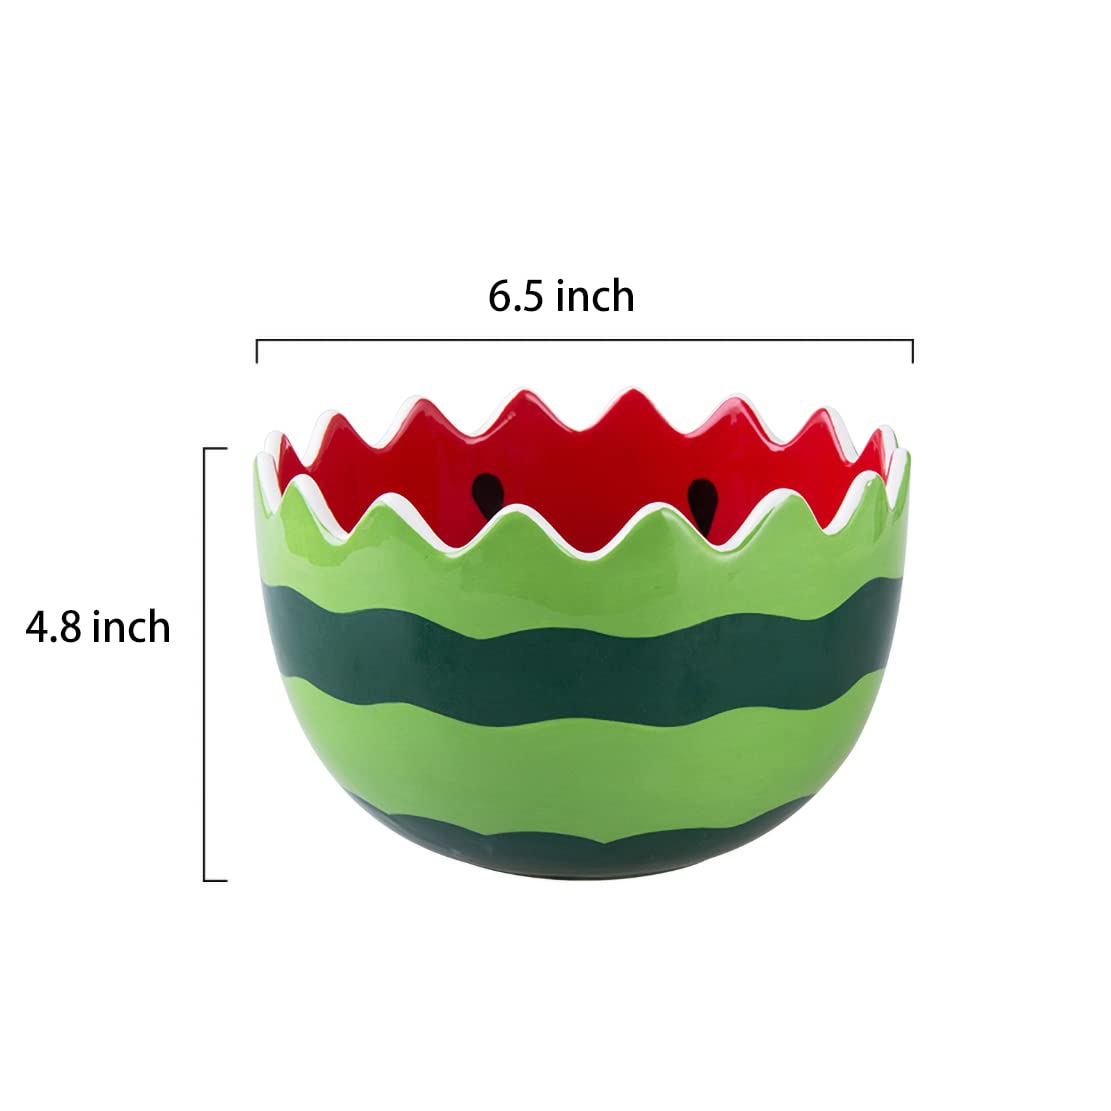 AwakingWaves Funny Hand Painted Watermelon Ceramic Pasta Bowl for Fruit Salad and Soup, Cute Kitchen Household Cooking Gifts for Home Kitchen, Colorful Design Containers Decor